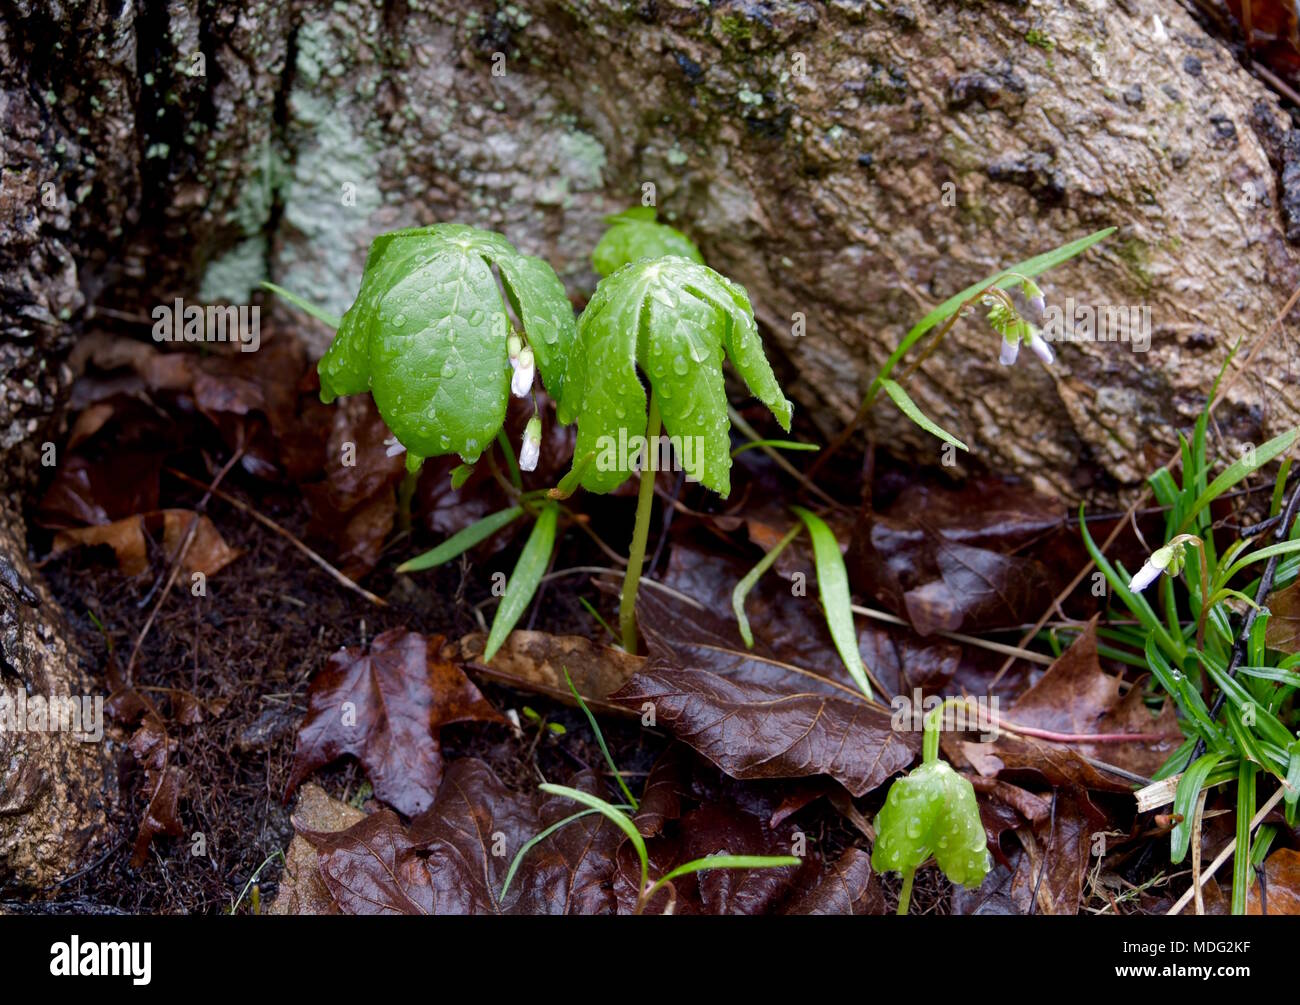 A pair of umbrella shaped mayapple leaves emerging in a forest with spring beauty flowers. Stock Photo